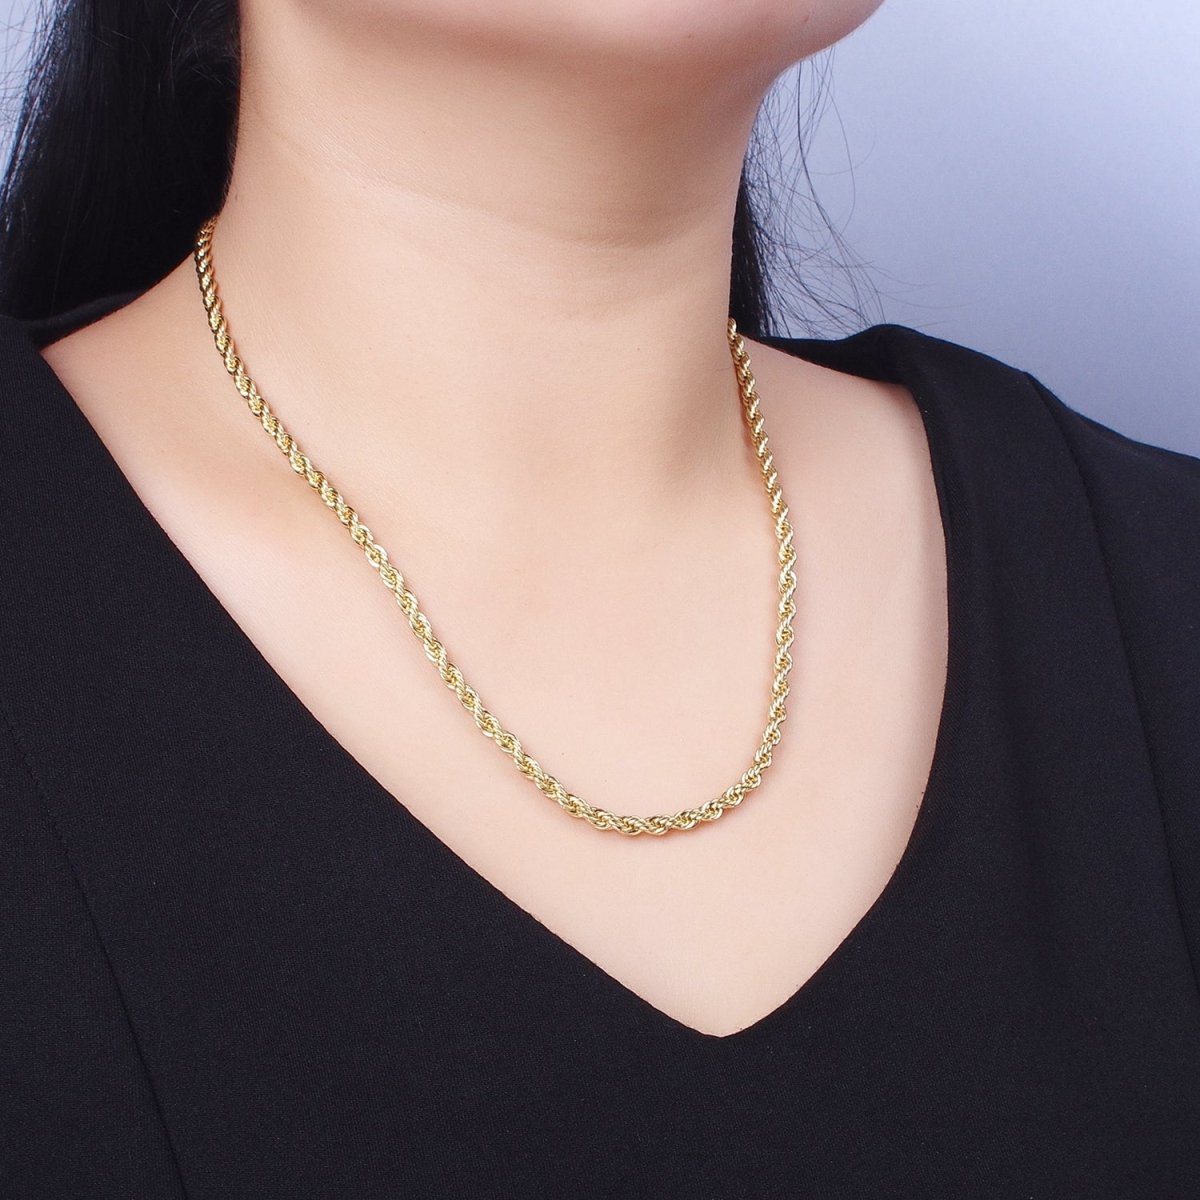 Bold Gold Rope necklace, Thick Chunky chain necklace 4mm Twist Necklace 18", 20 inch + 2 inch extender | WA-1536 WA-1537 Clearance Pricing - DLUXCA